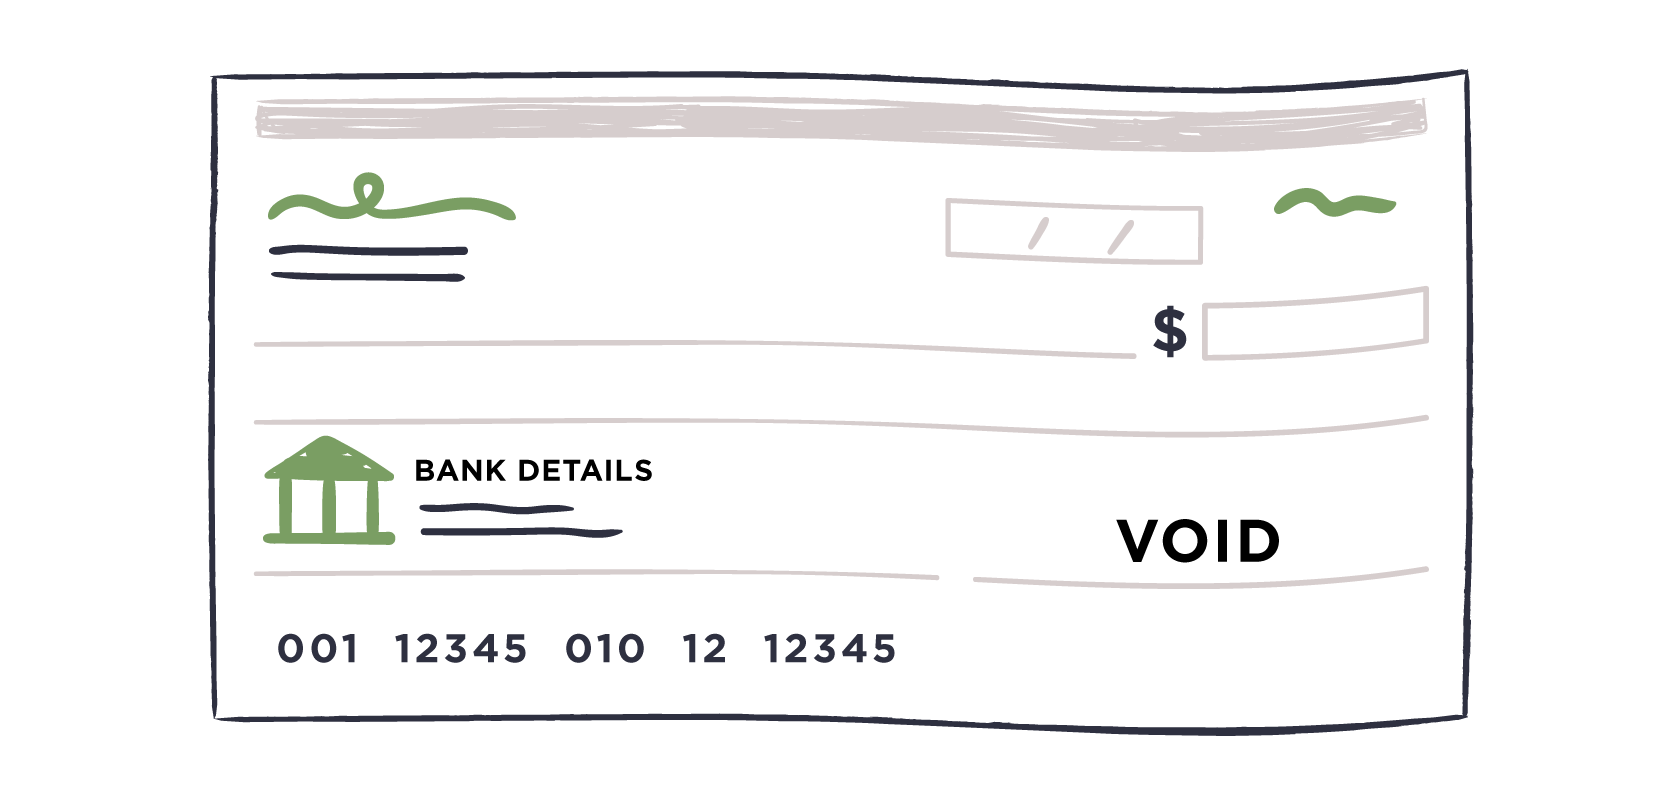 The stylized graphic shows a mockup of what a void cheque might look like, including where bank details go, the account numbers and how the word void may appear.